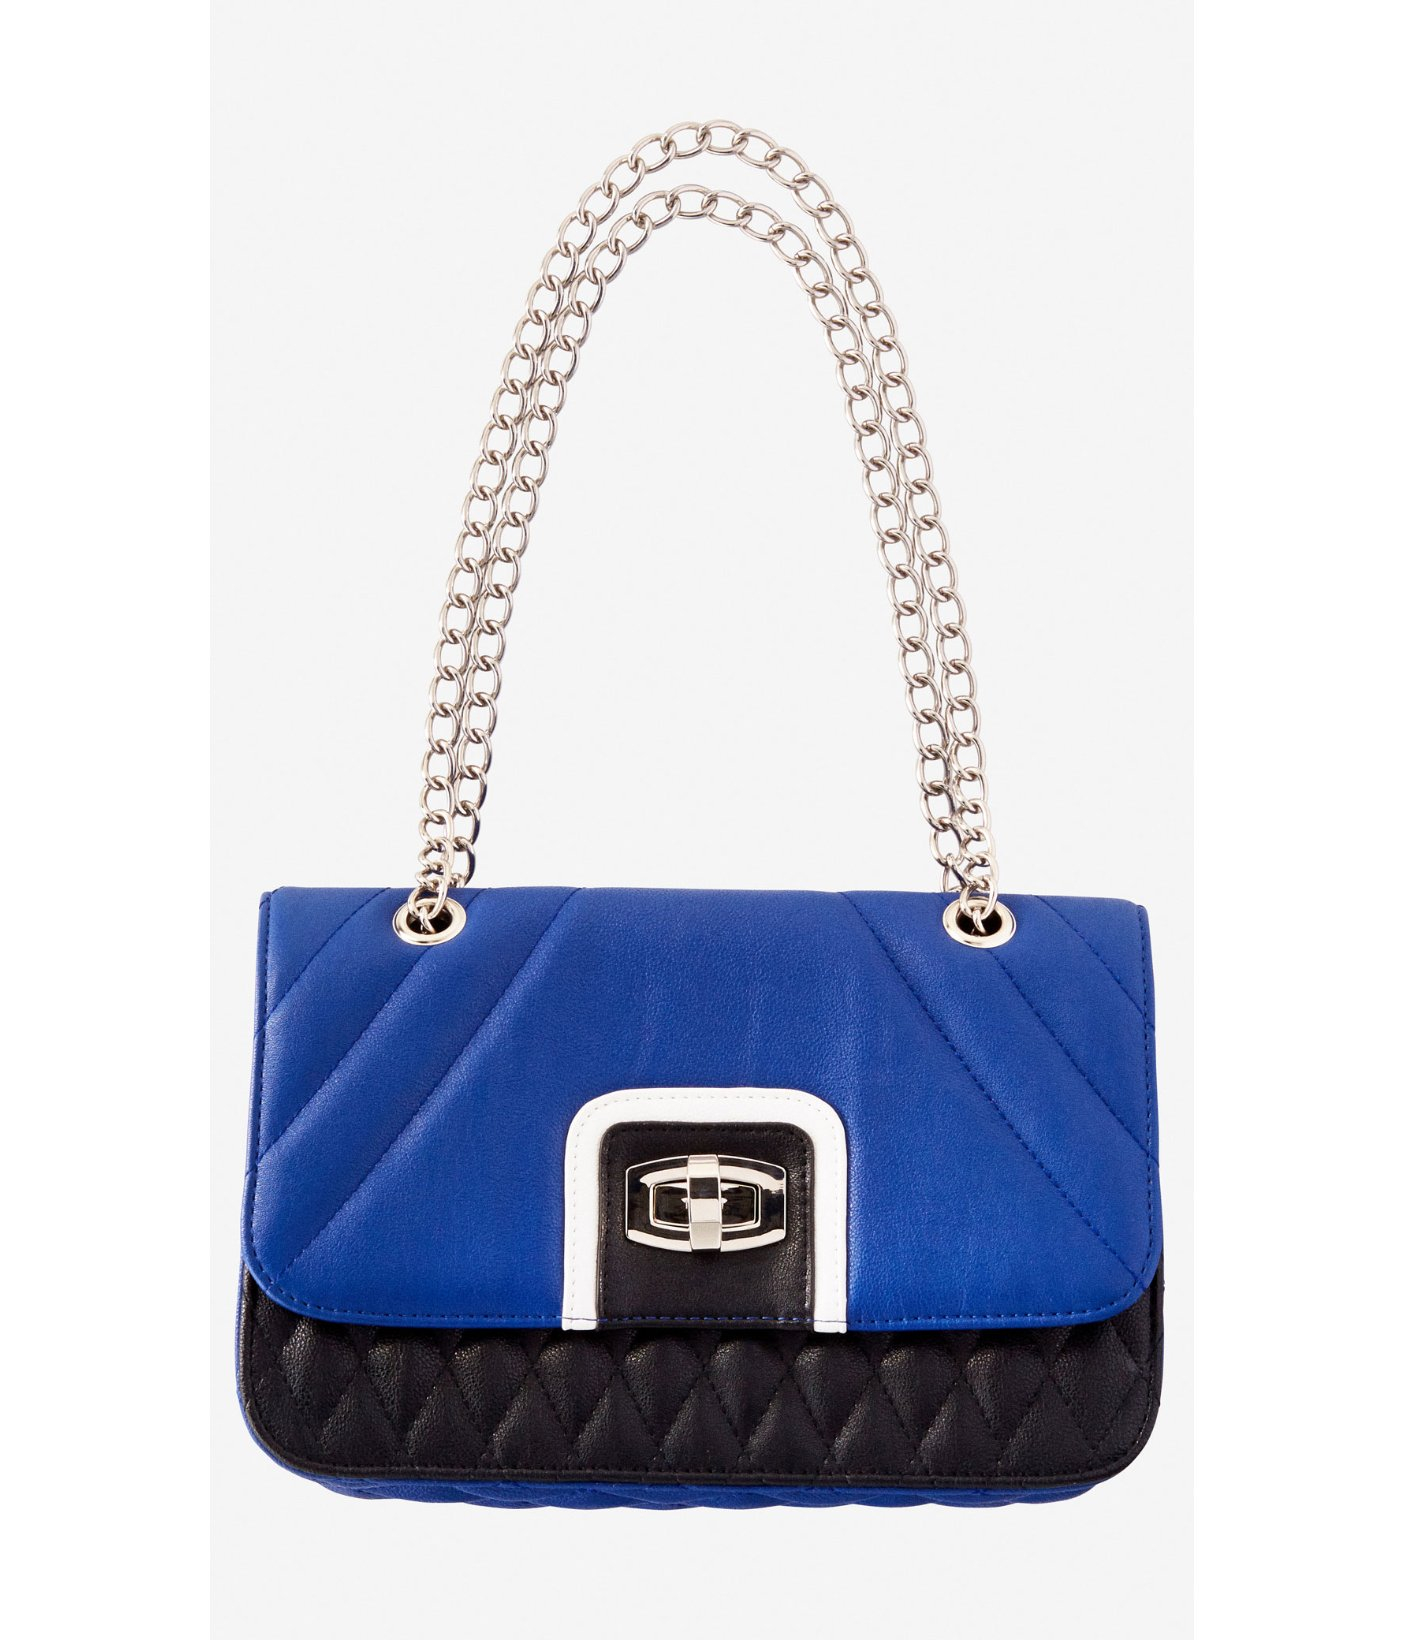 Express Linear Quilted Chain Strap Shoulder Bag in Blue - Lyst